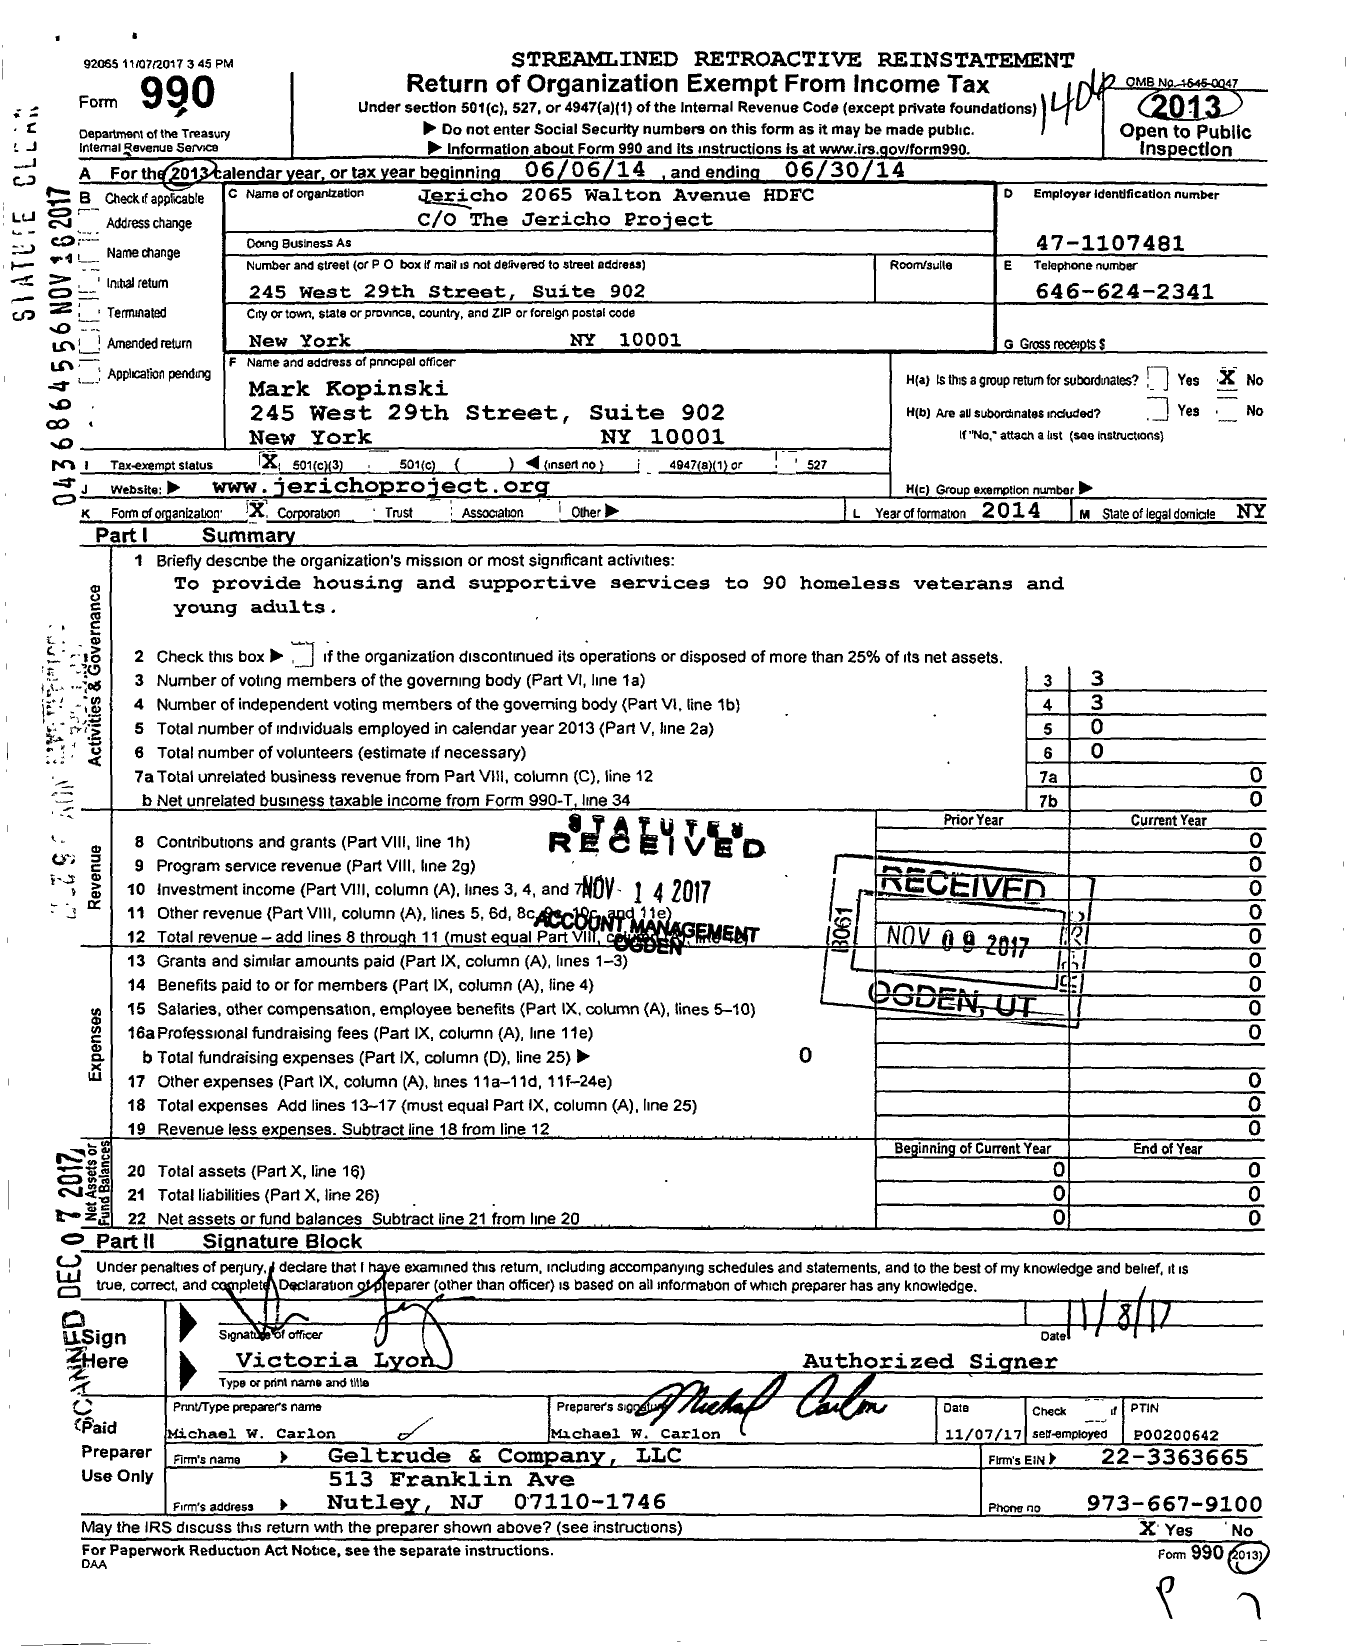 Image of first page of 2013 Form 990 for Jericho 2065 Walton Avenue HDFC